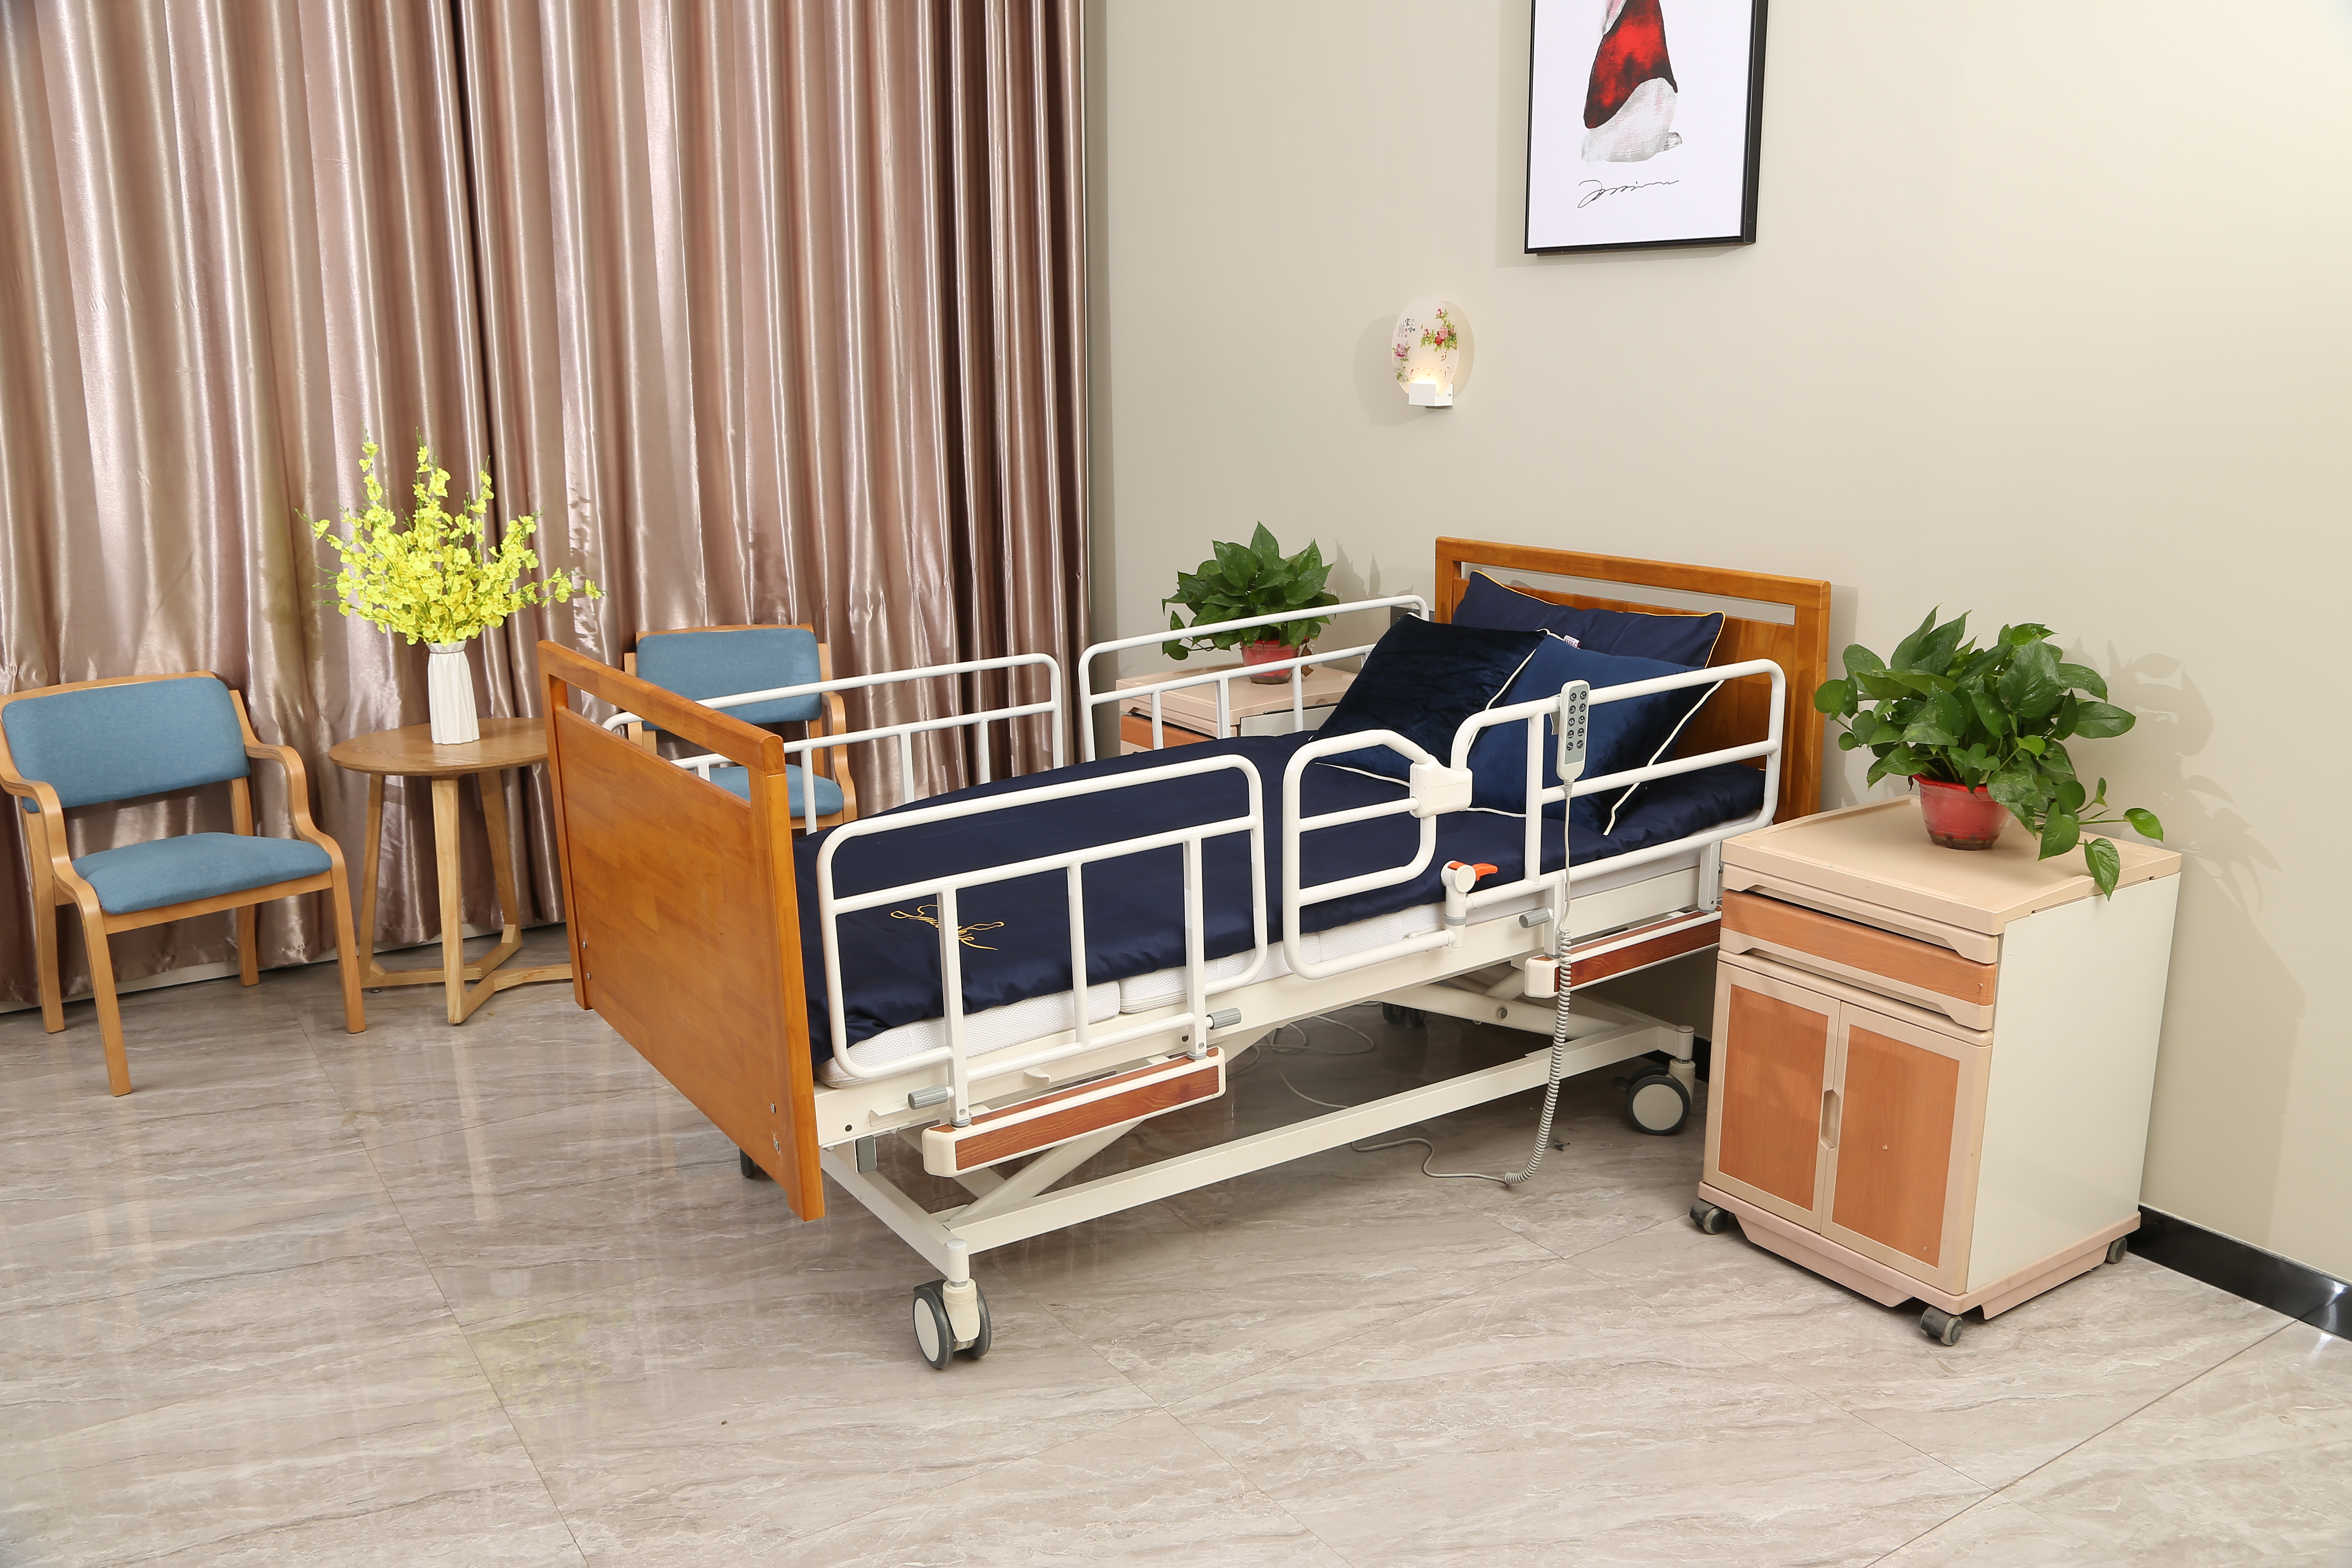 Which kind of bed is suitable for elderly care？